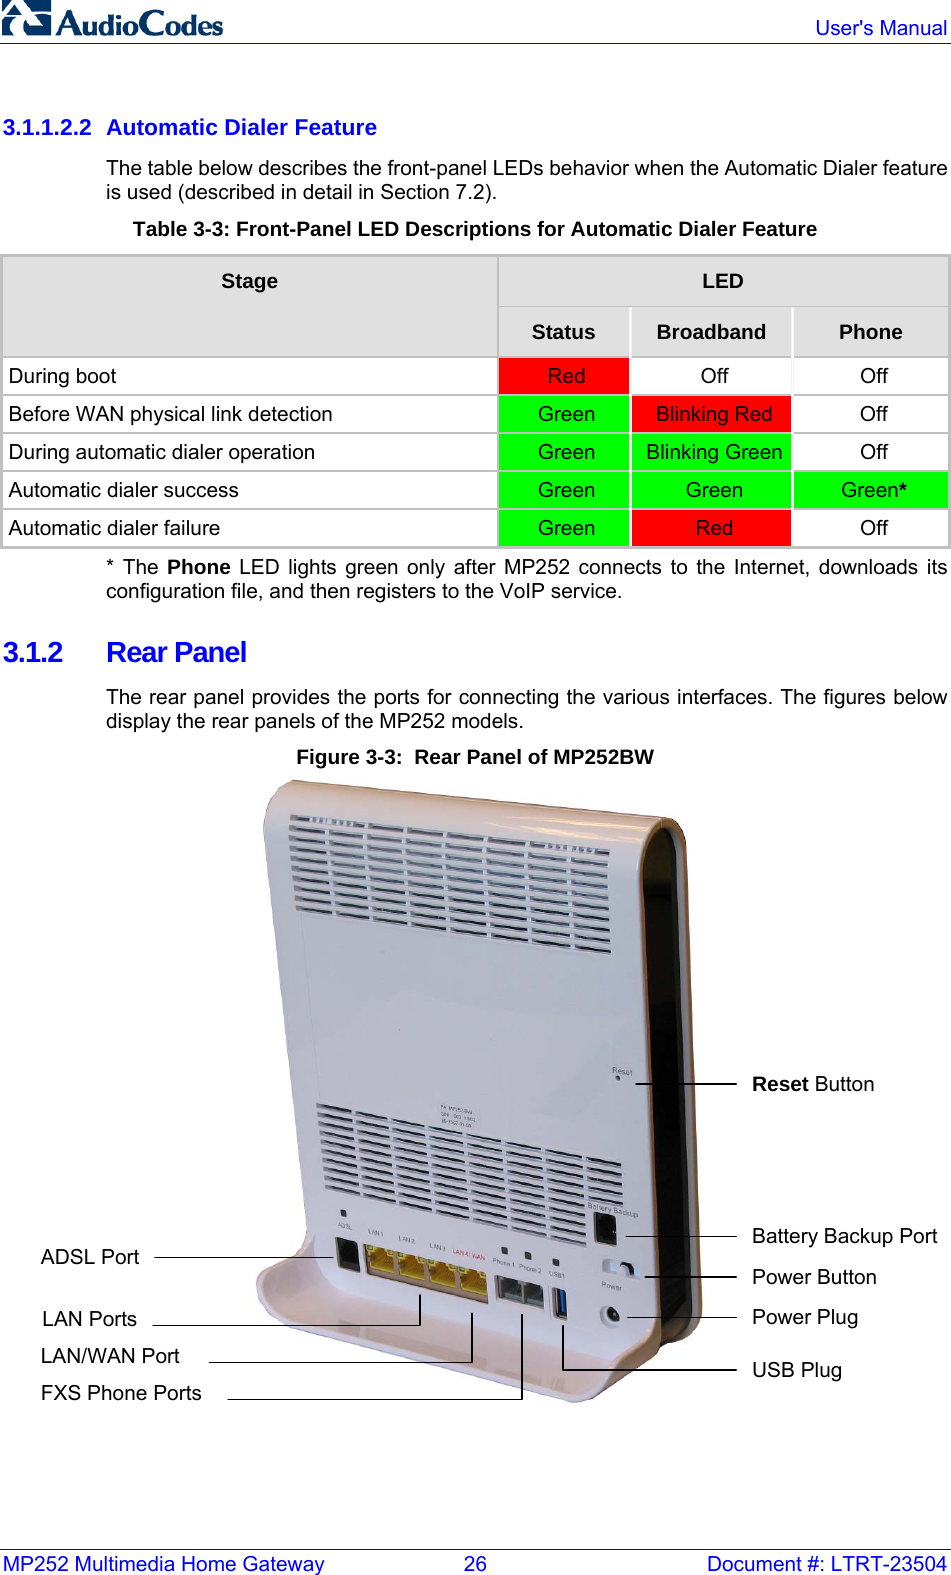 MP252 Multimedia Home Gateway  26  Document #: LTRT-23504  User&apos;s Manual 3.1.1.2.2  Automatic Dialer Feature The table below describes the front-panel LEDs behavior when the Automatic Dialer feature is used (described in detail in Section 7.2). Table 3-3: Front-Panel LED Descriptions for Automatic Dialer Feature LED Stage Status  Broadband  Phone During boot Red Off  Off Before WAN physical link detection Green  Blinking Red  Off During automatic dialer operation Green  Blinking Green  Off Automatic dialer success Green  Green  Green* Automatic dialer failure  Green  Red Off * The Phone LED lights green only after MP252 connects to the Internet, downloads its configuration file, and then registers to the VoIP service. 3.1.2 Rear Panel The rear panel provides the ports for connecting the various interfaces. The figures below display the rear panels of the MP252 models. Figure 3-3:  Rear Panel of MP252BW   Reset Button Battery Backup Port Power Plug FXS Phone Ports LAN/WAN Port ADSL Port LAN Ports USB Plug Power Button 